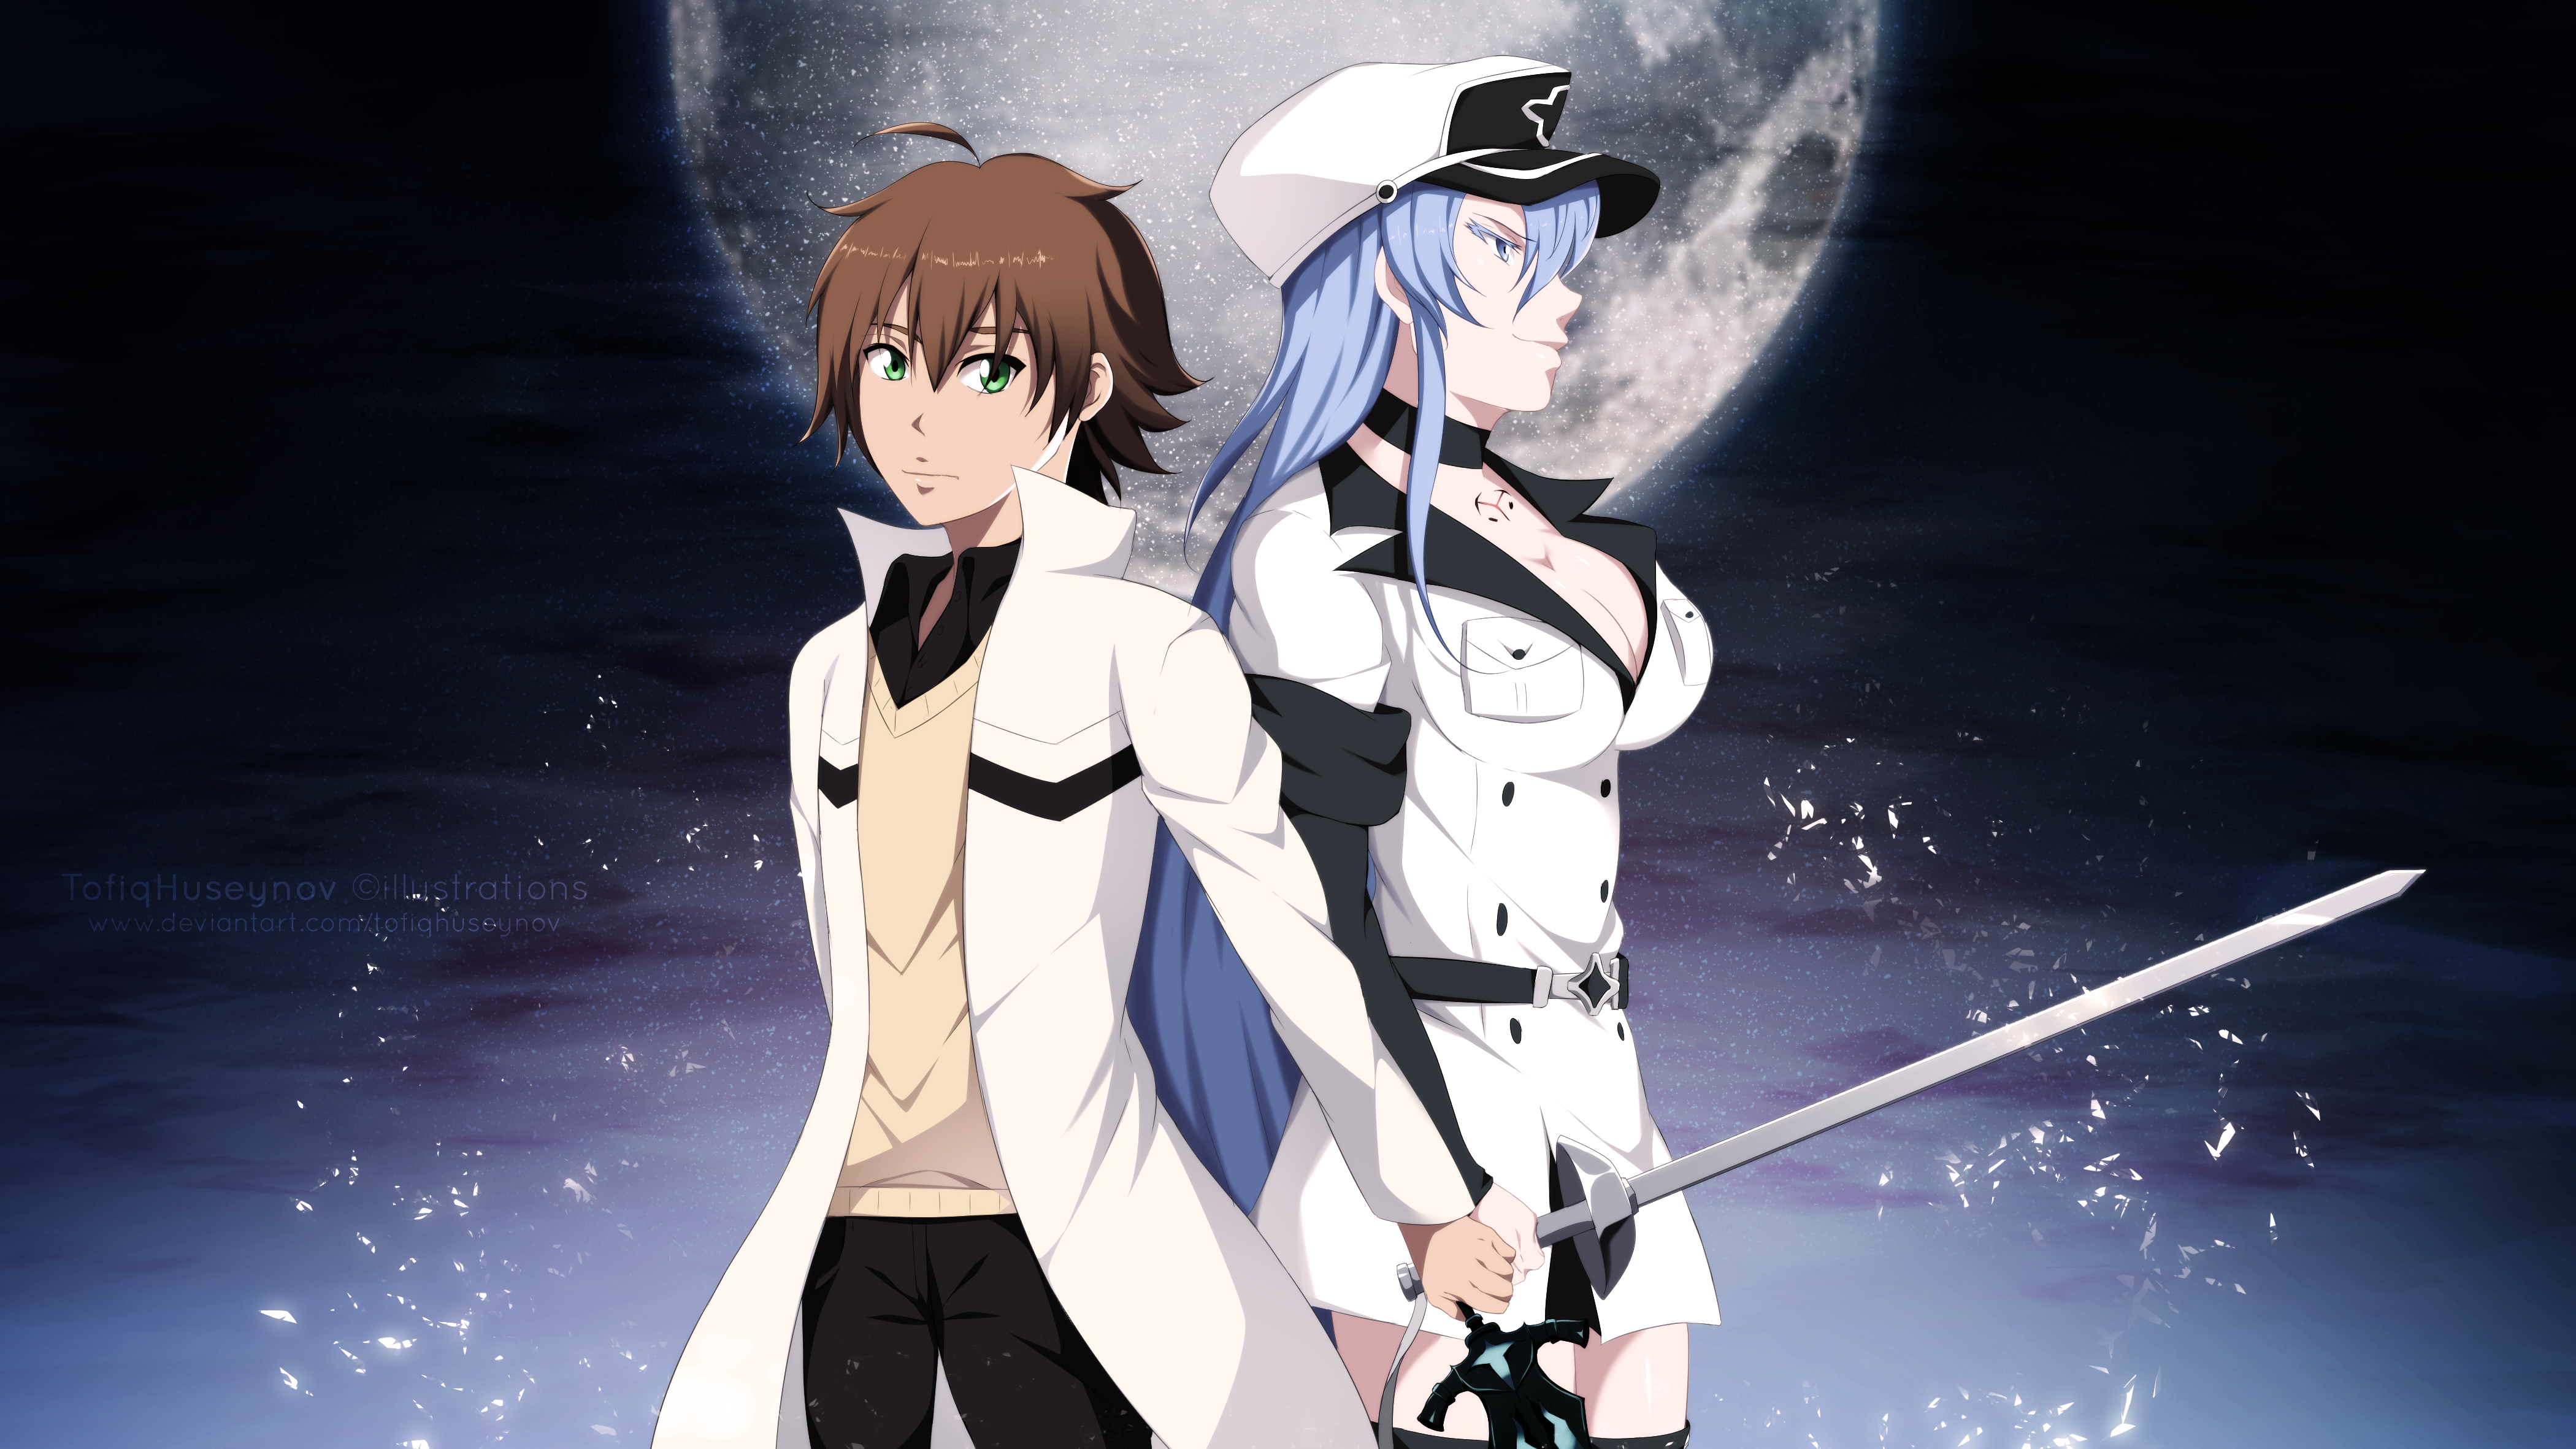 Tatsumi and esdeath by StayAlivePlz